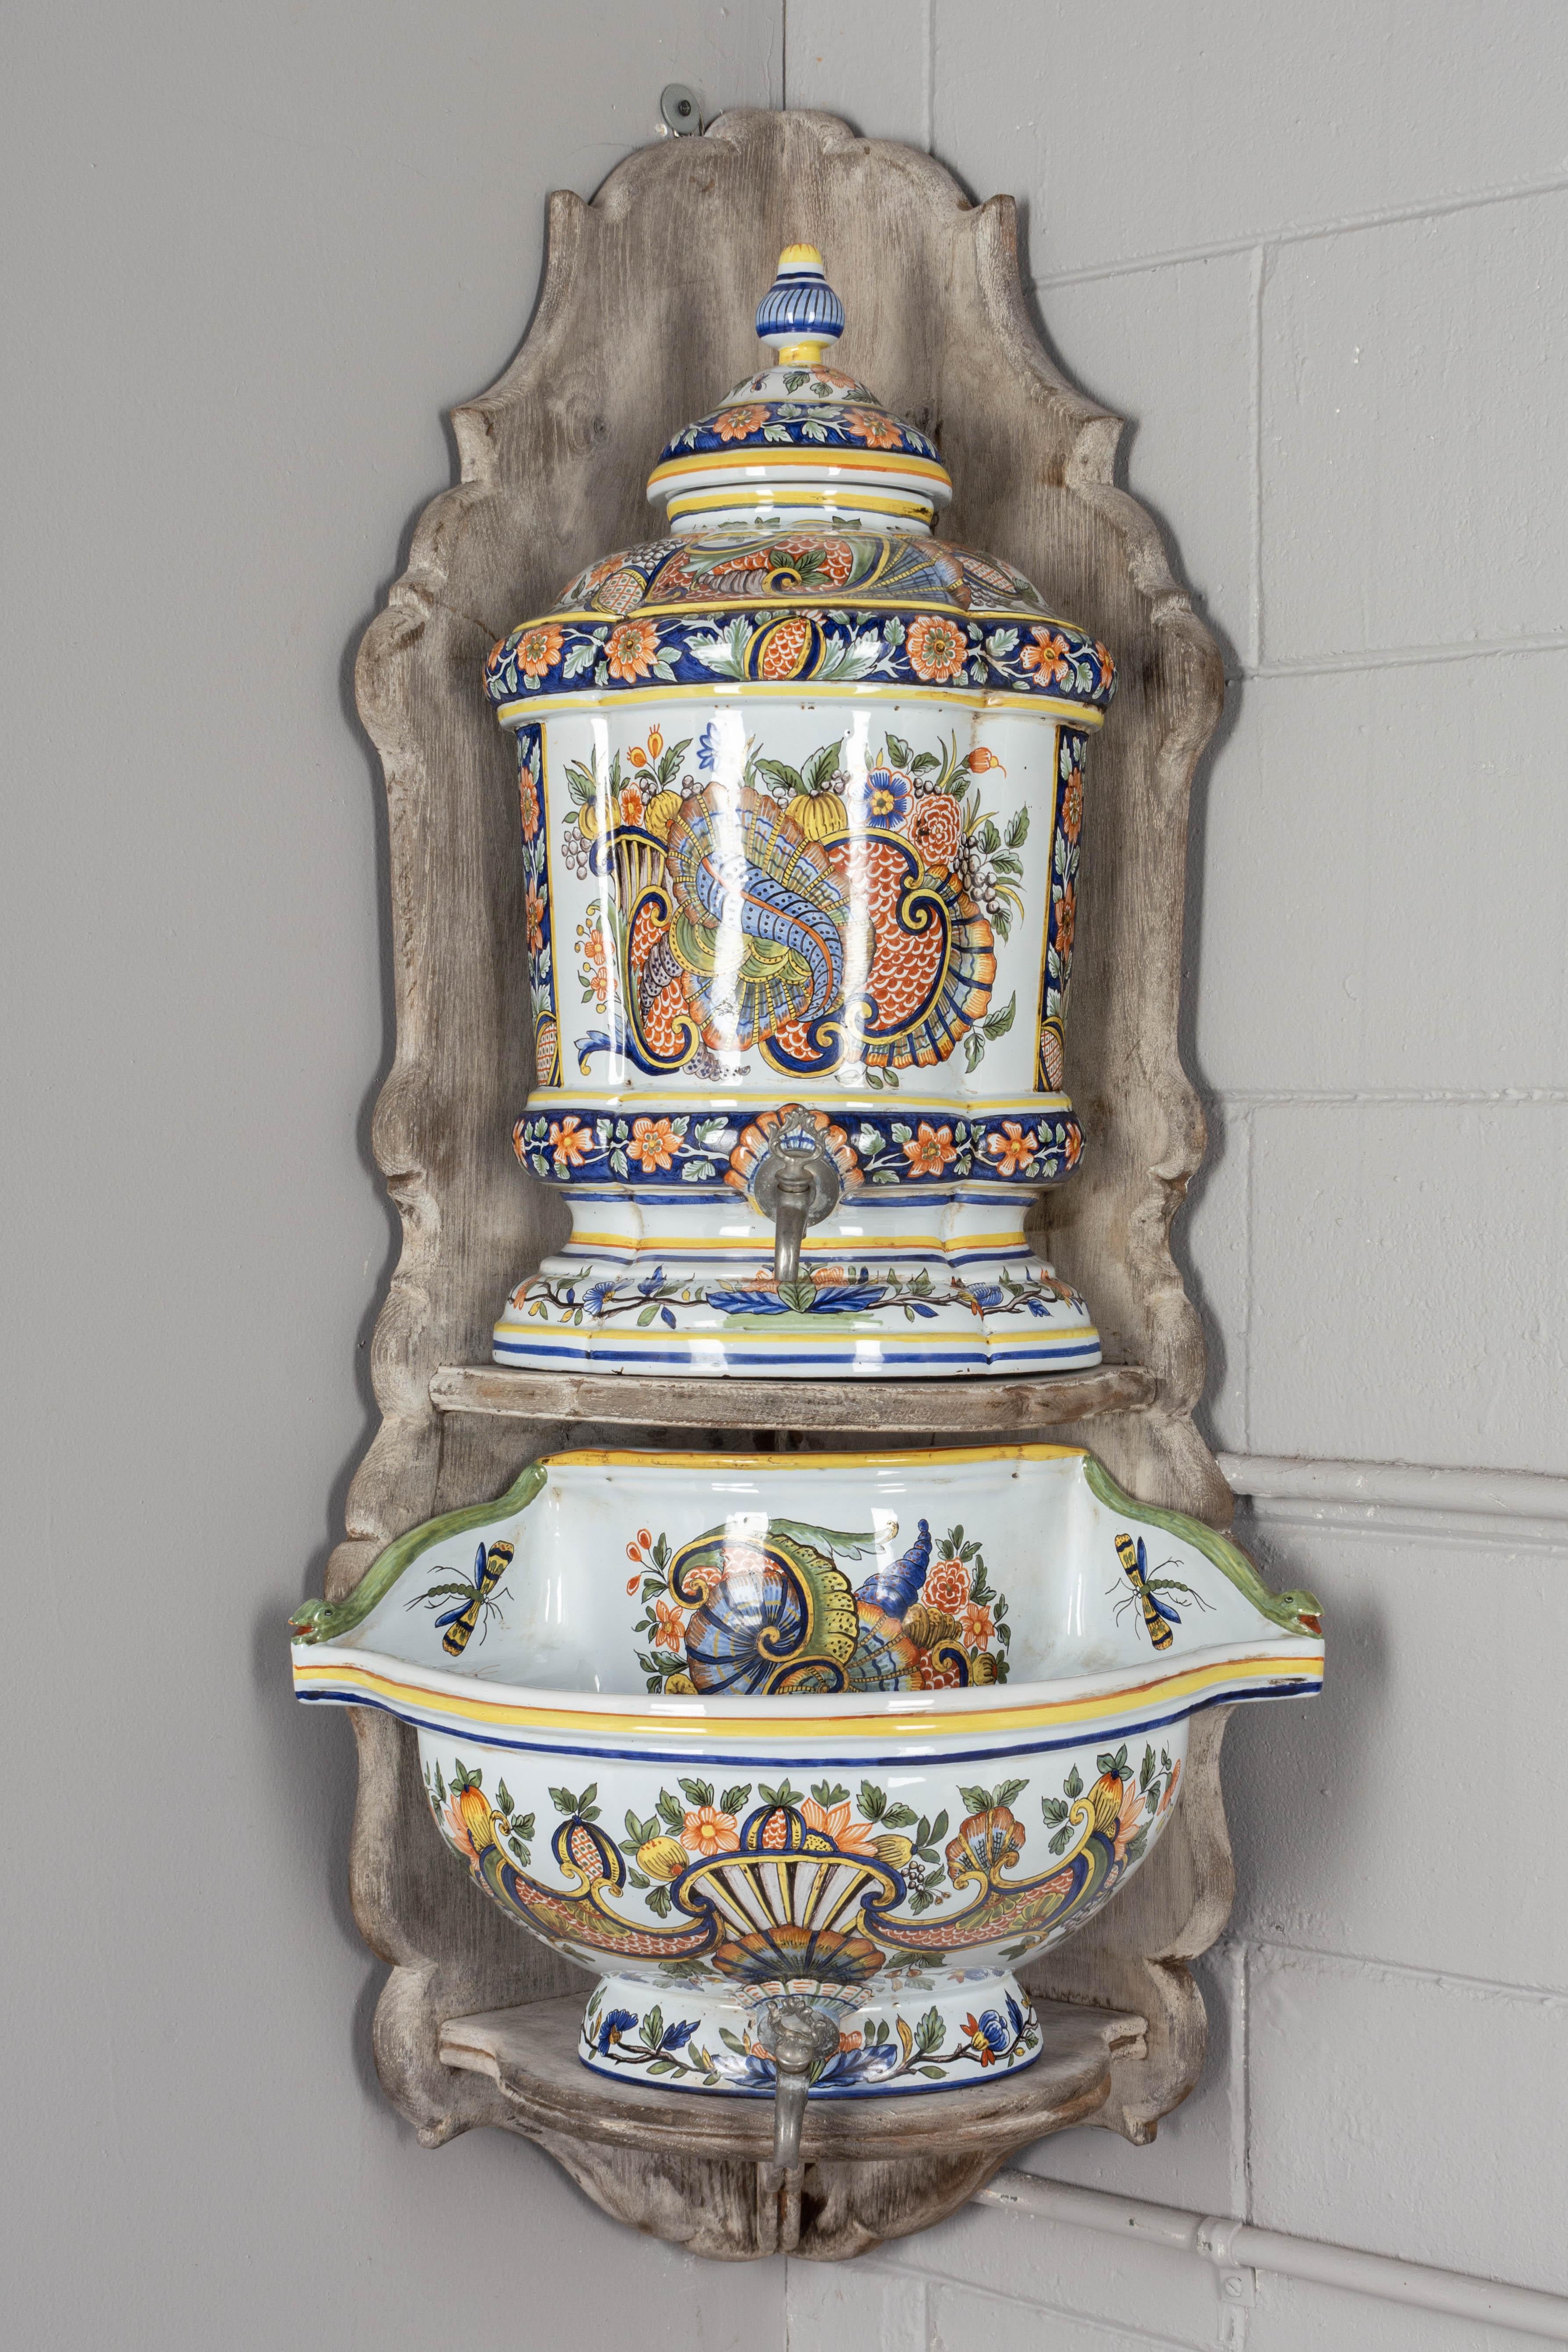 A French Desvres faience Louis XV style lavabo with traditional colorful hand painted decoration. The lidded urn and large deep basin rest on a whitewashed chestnut wall mounted corner shelf. Each with metal spouts and makers mark on the underside.